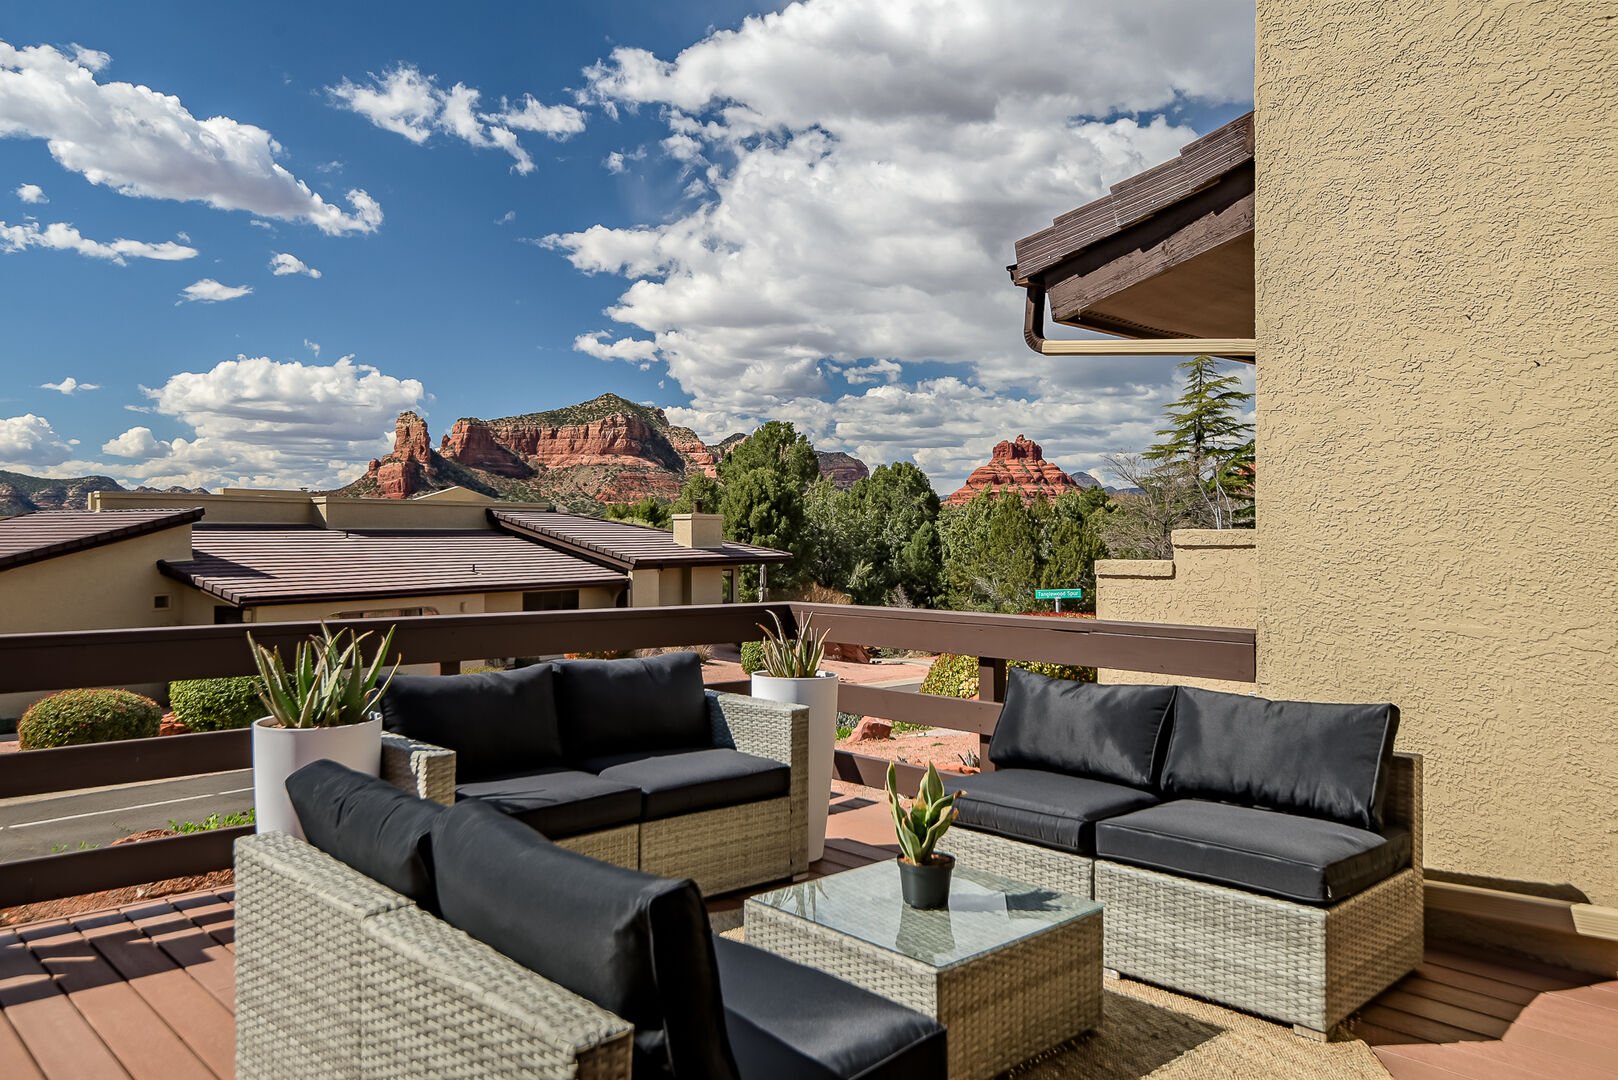 Outdoor Seating Area to Enjoy While Taking in Red Rock Views!